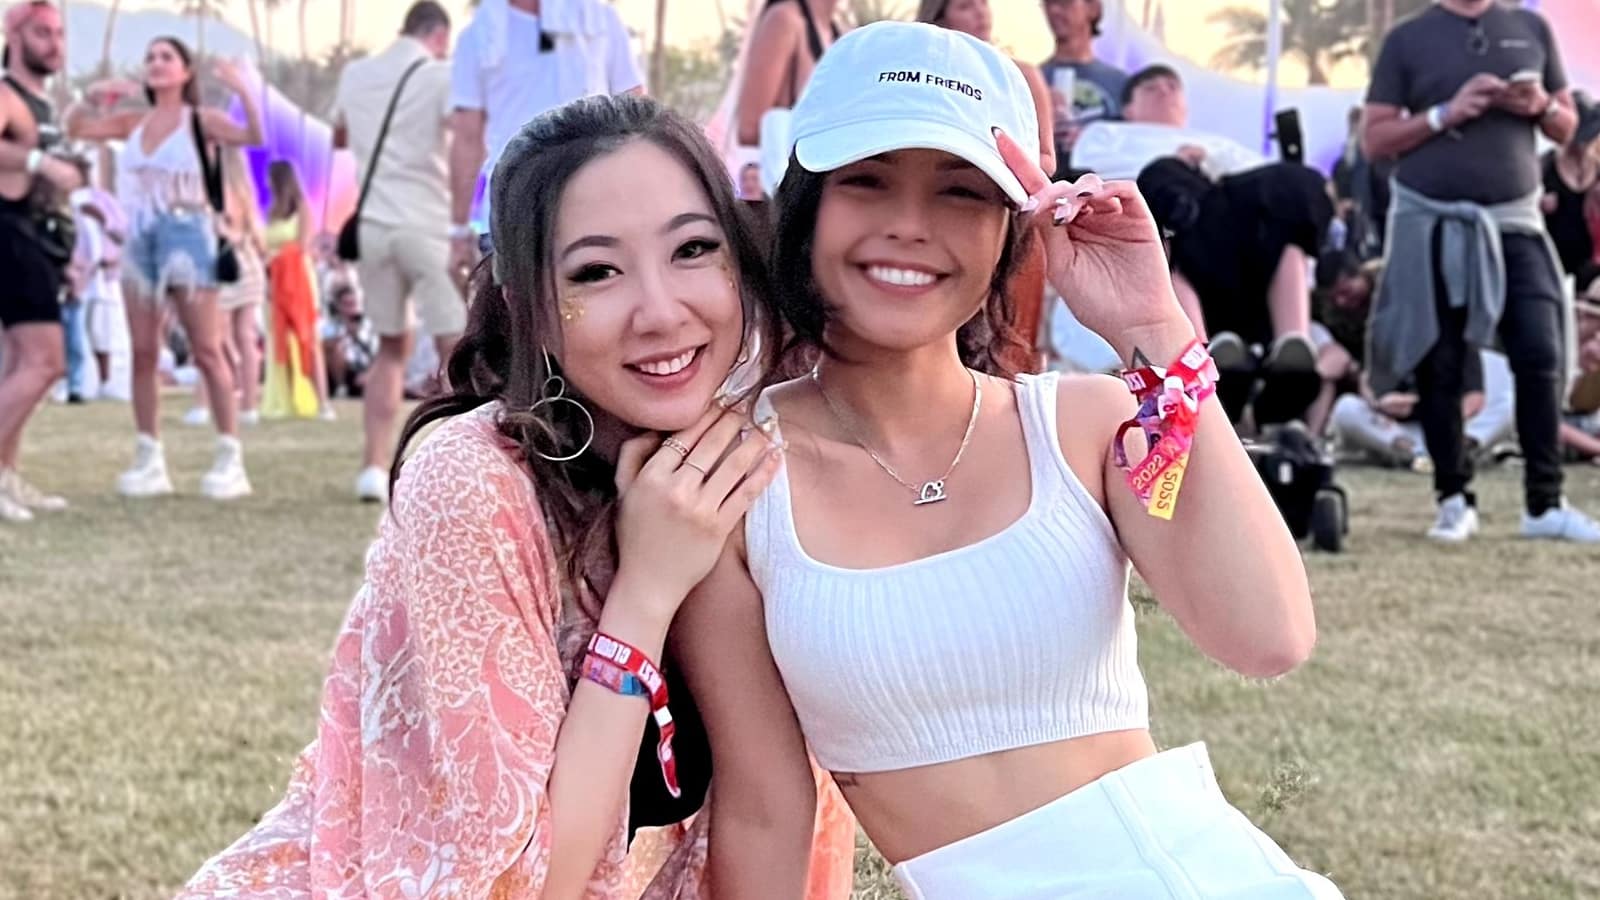 twitch and youtube stars valkyrae and fuslie at coachella music festival